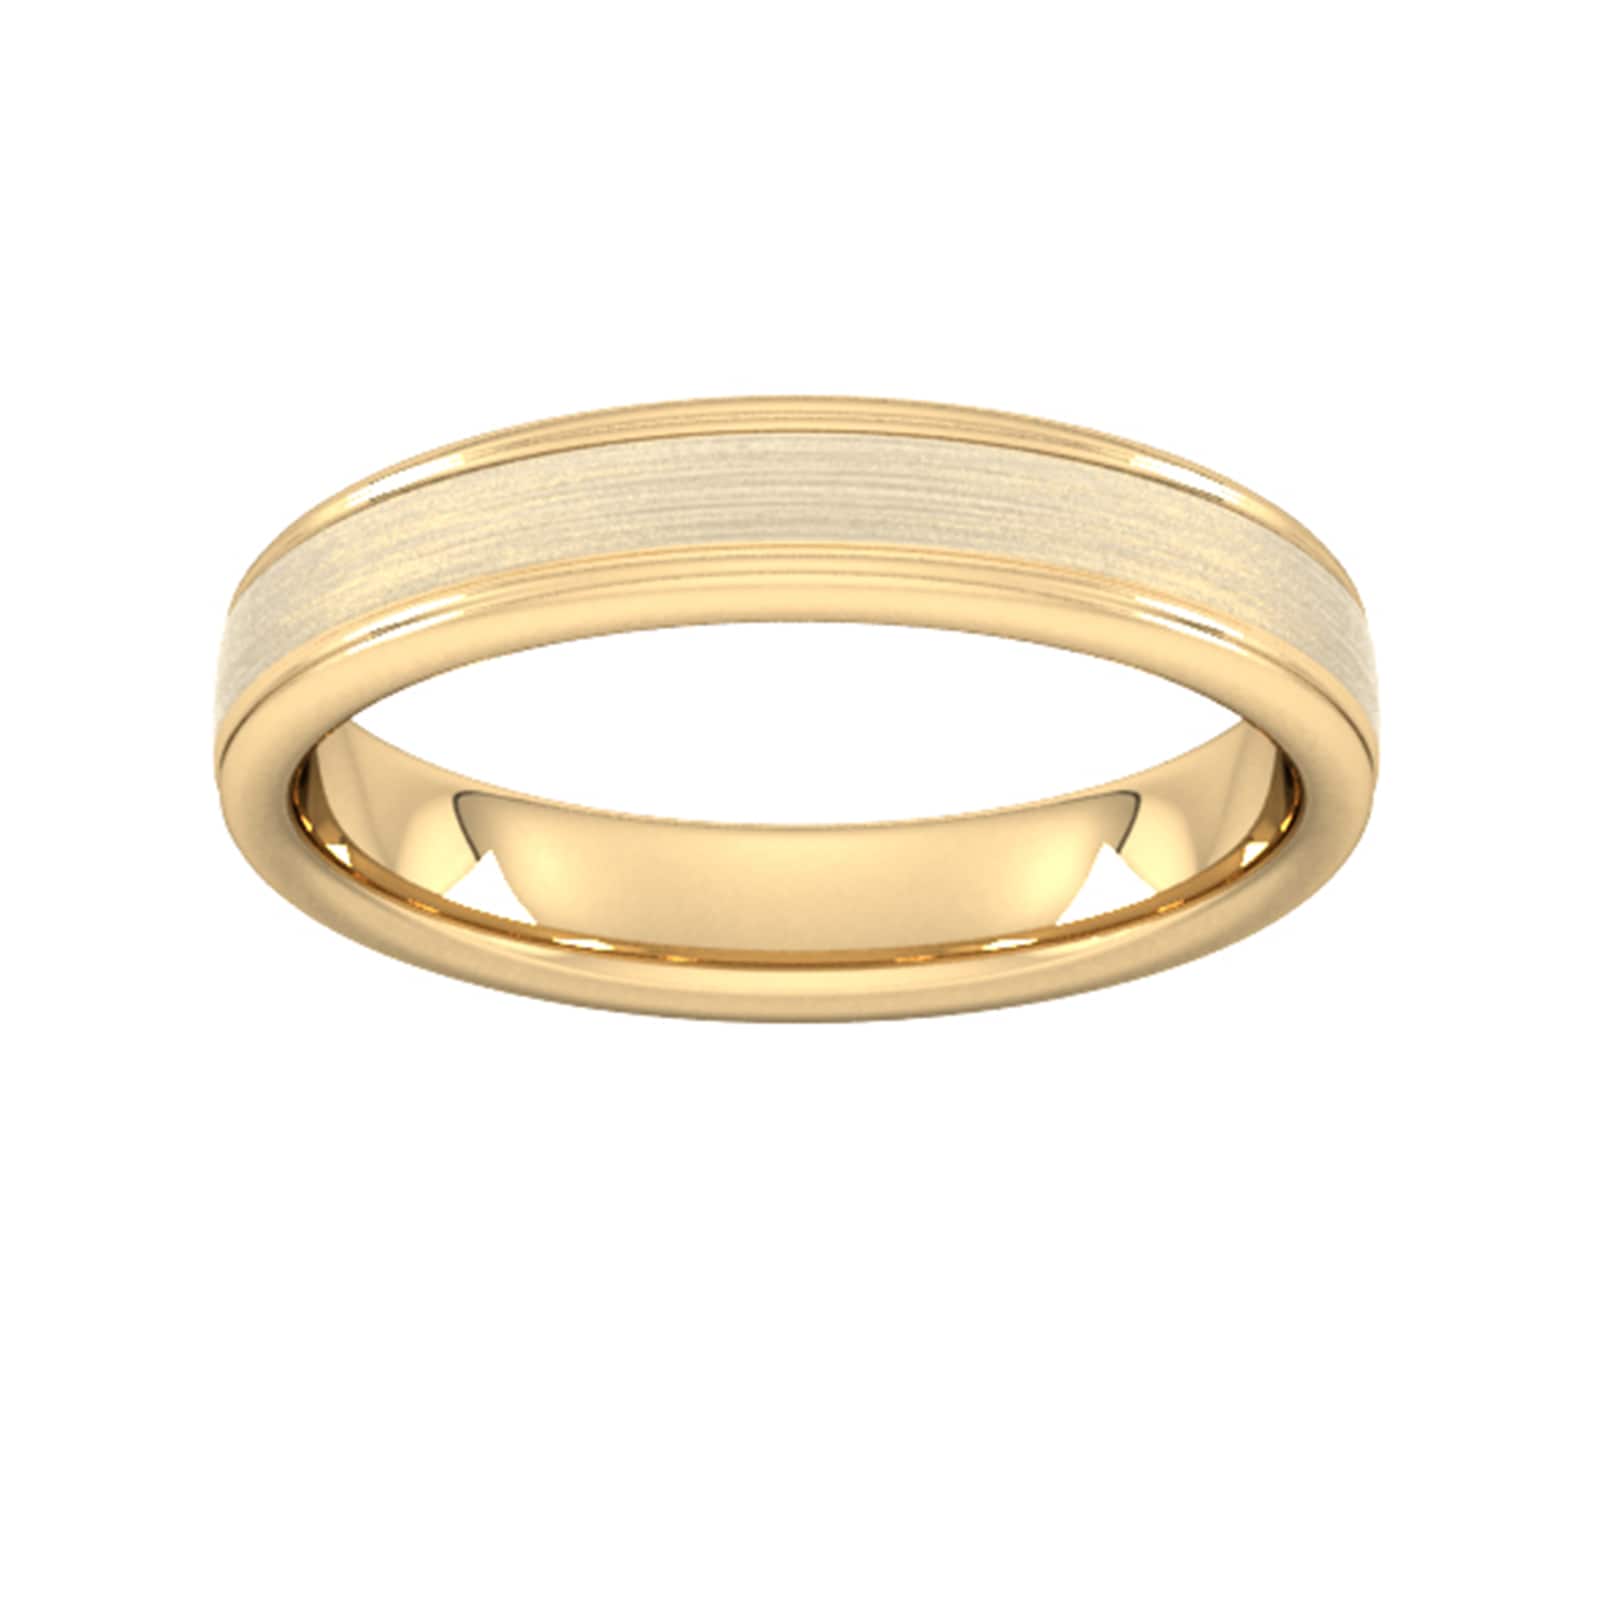 4mm Traditional Court Standard Matt Centre With Grooves Wedding Ring In 18 Carat Yellow Gold - Ring Size J